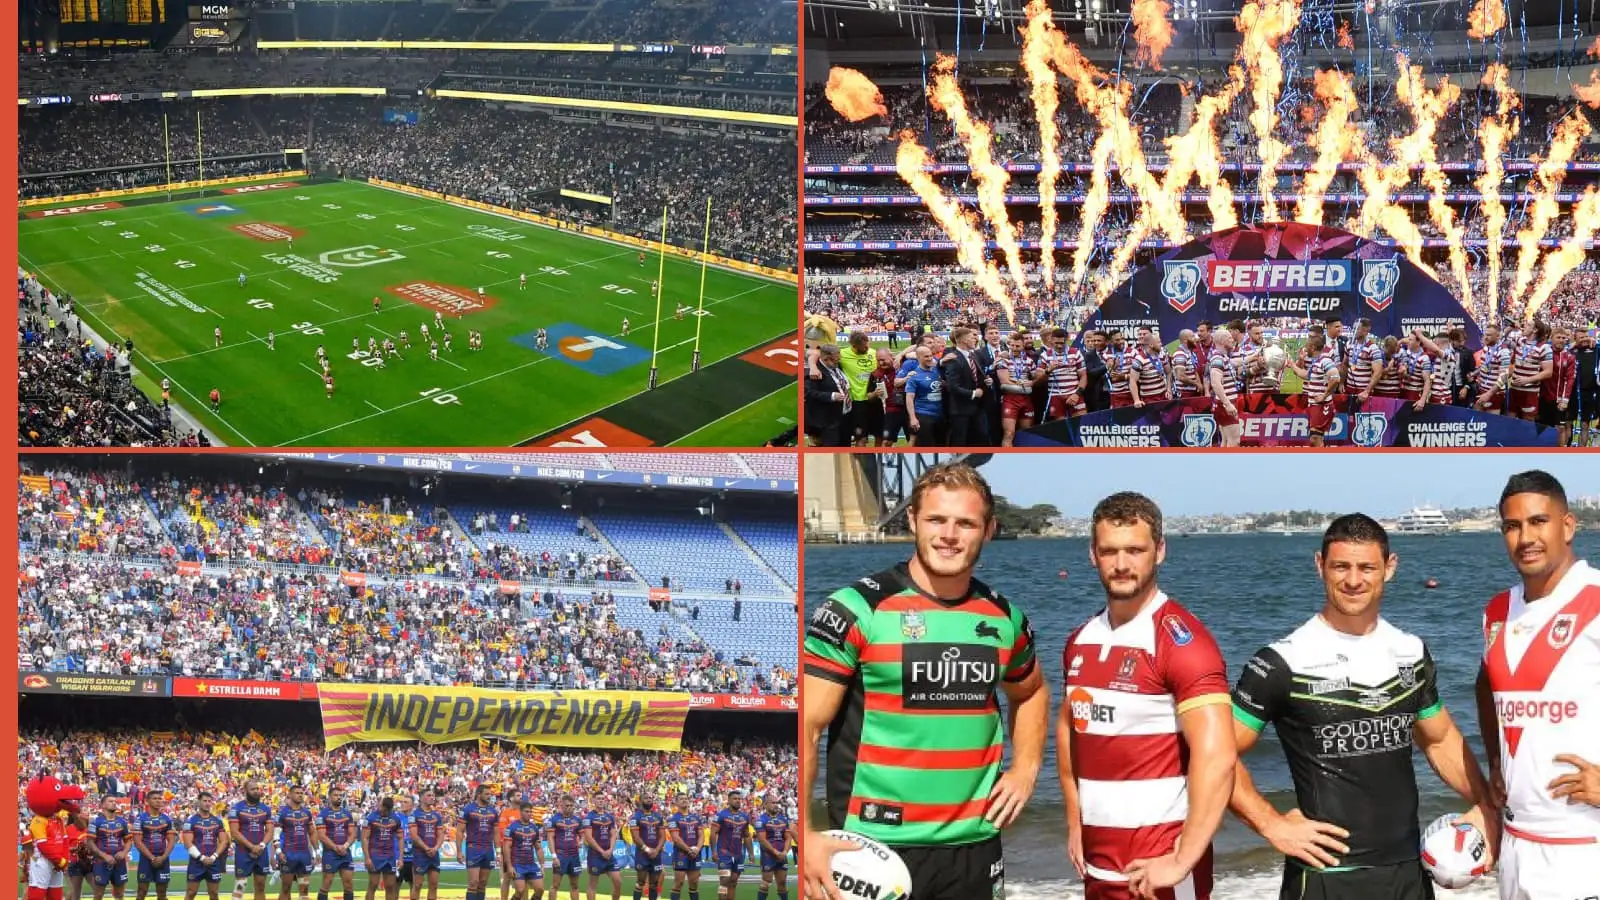 Wigan Warriors’ list of extraordinary venues played at with Las Vegas to be added in 2025